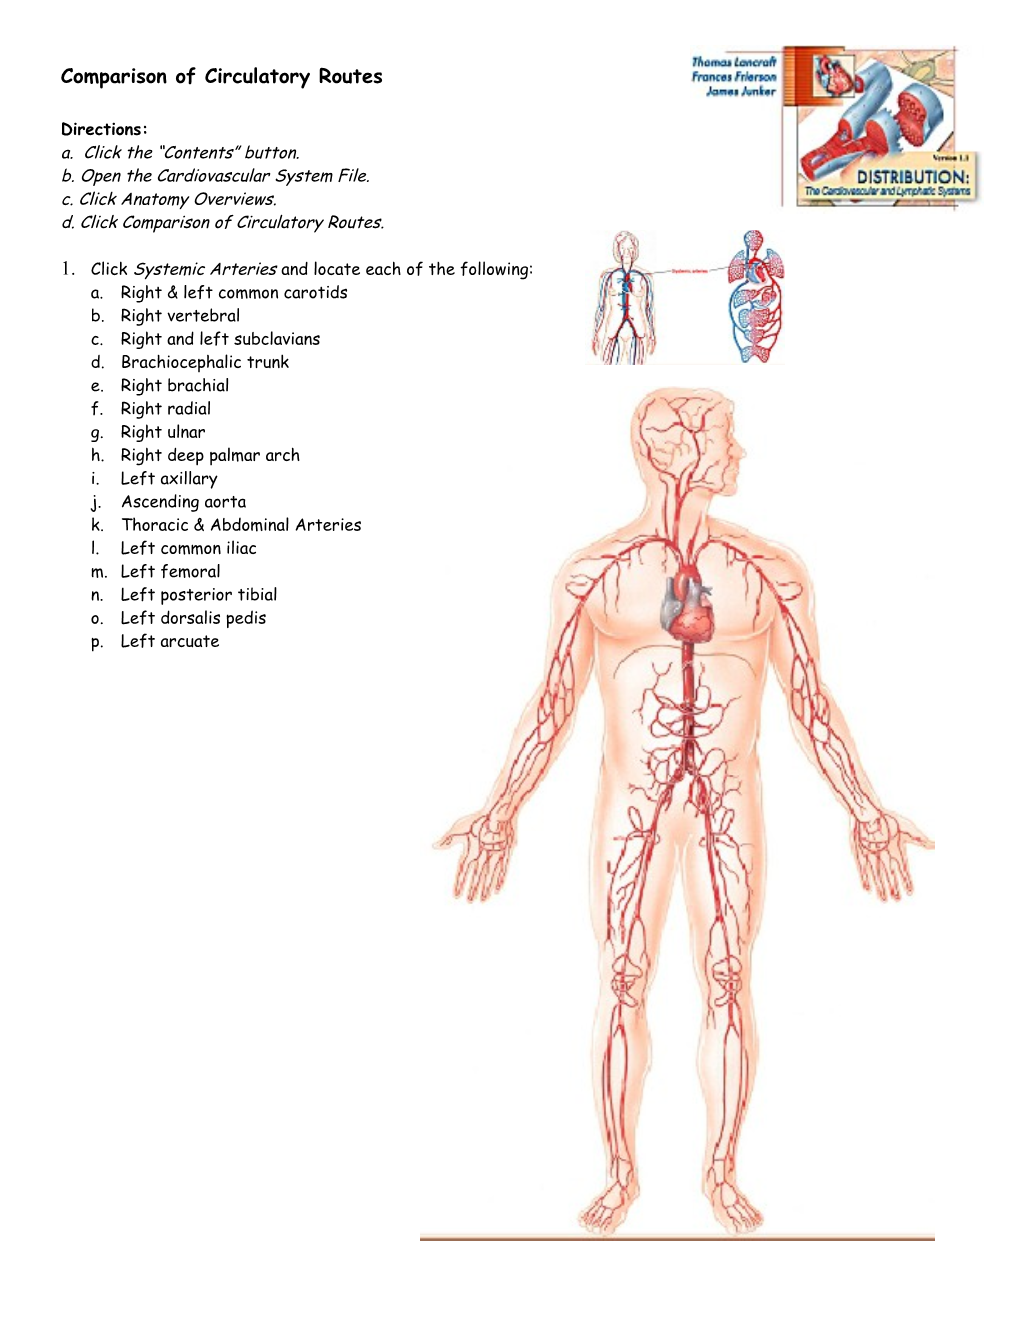 Endocrine System: Overview s5